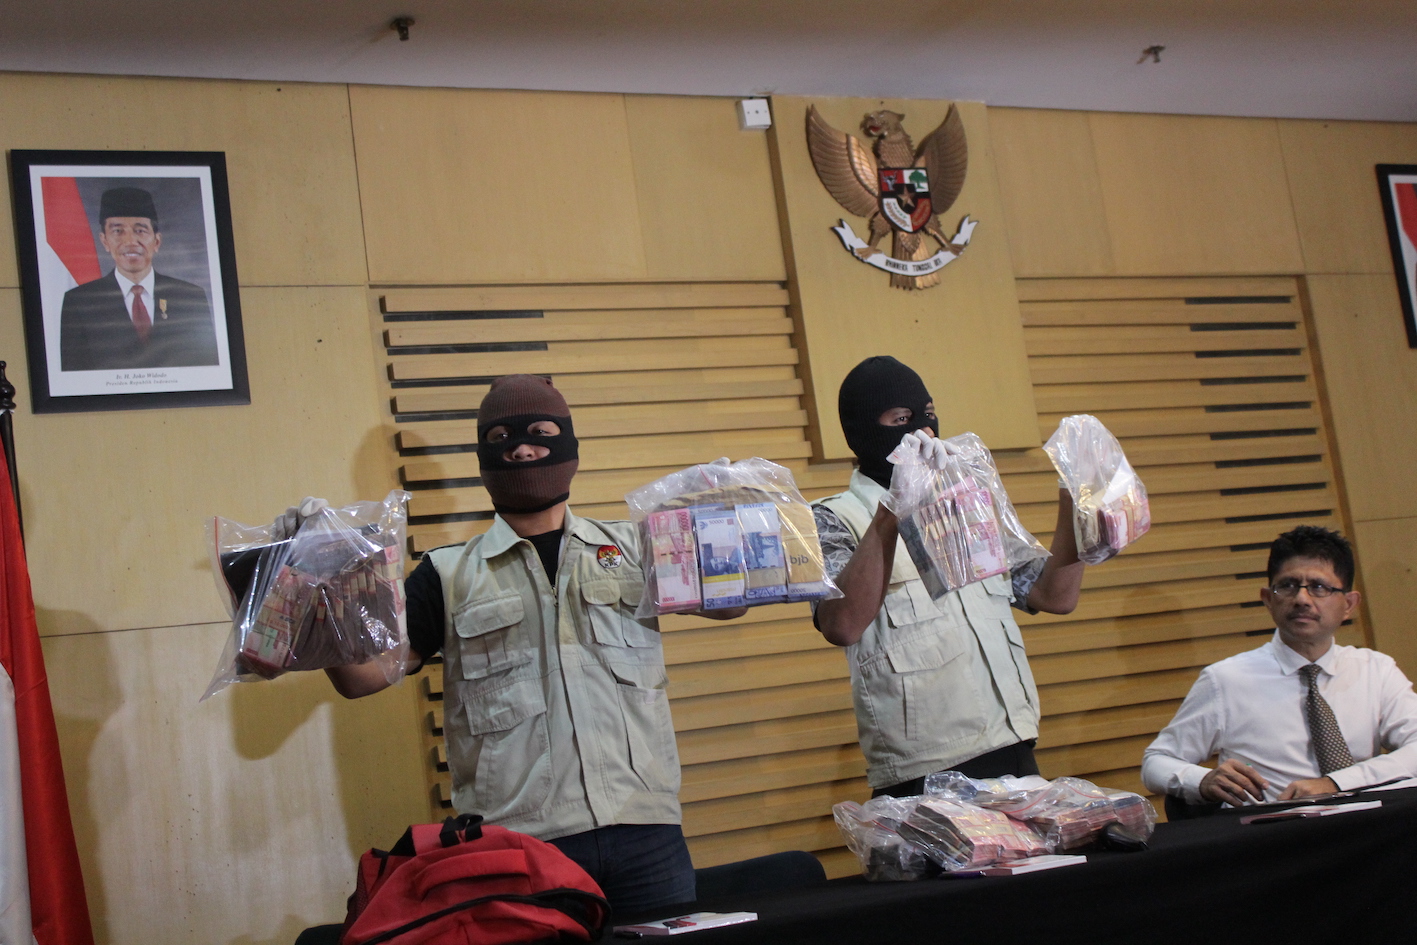 Corruption plagues Indonesia at all levels of government